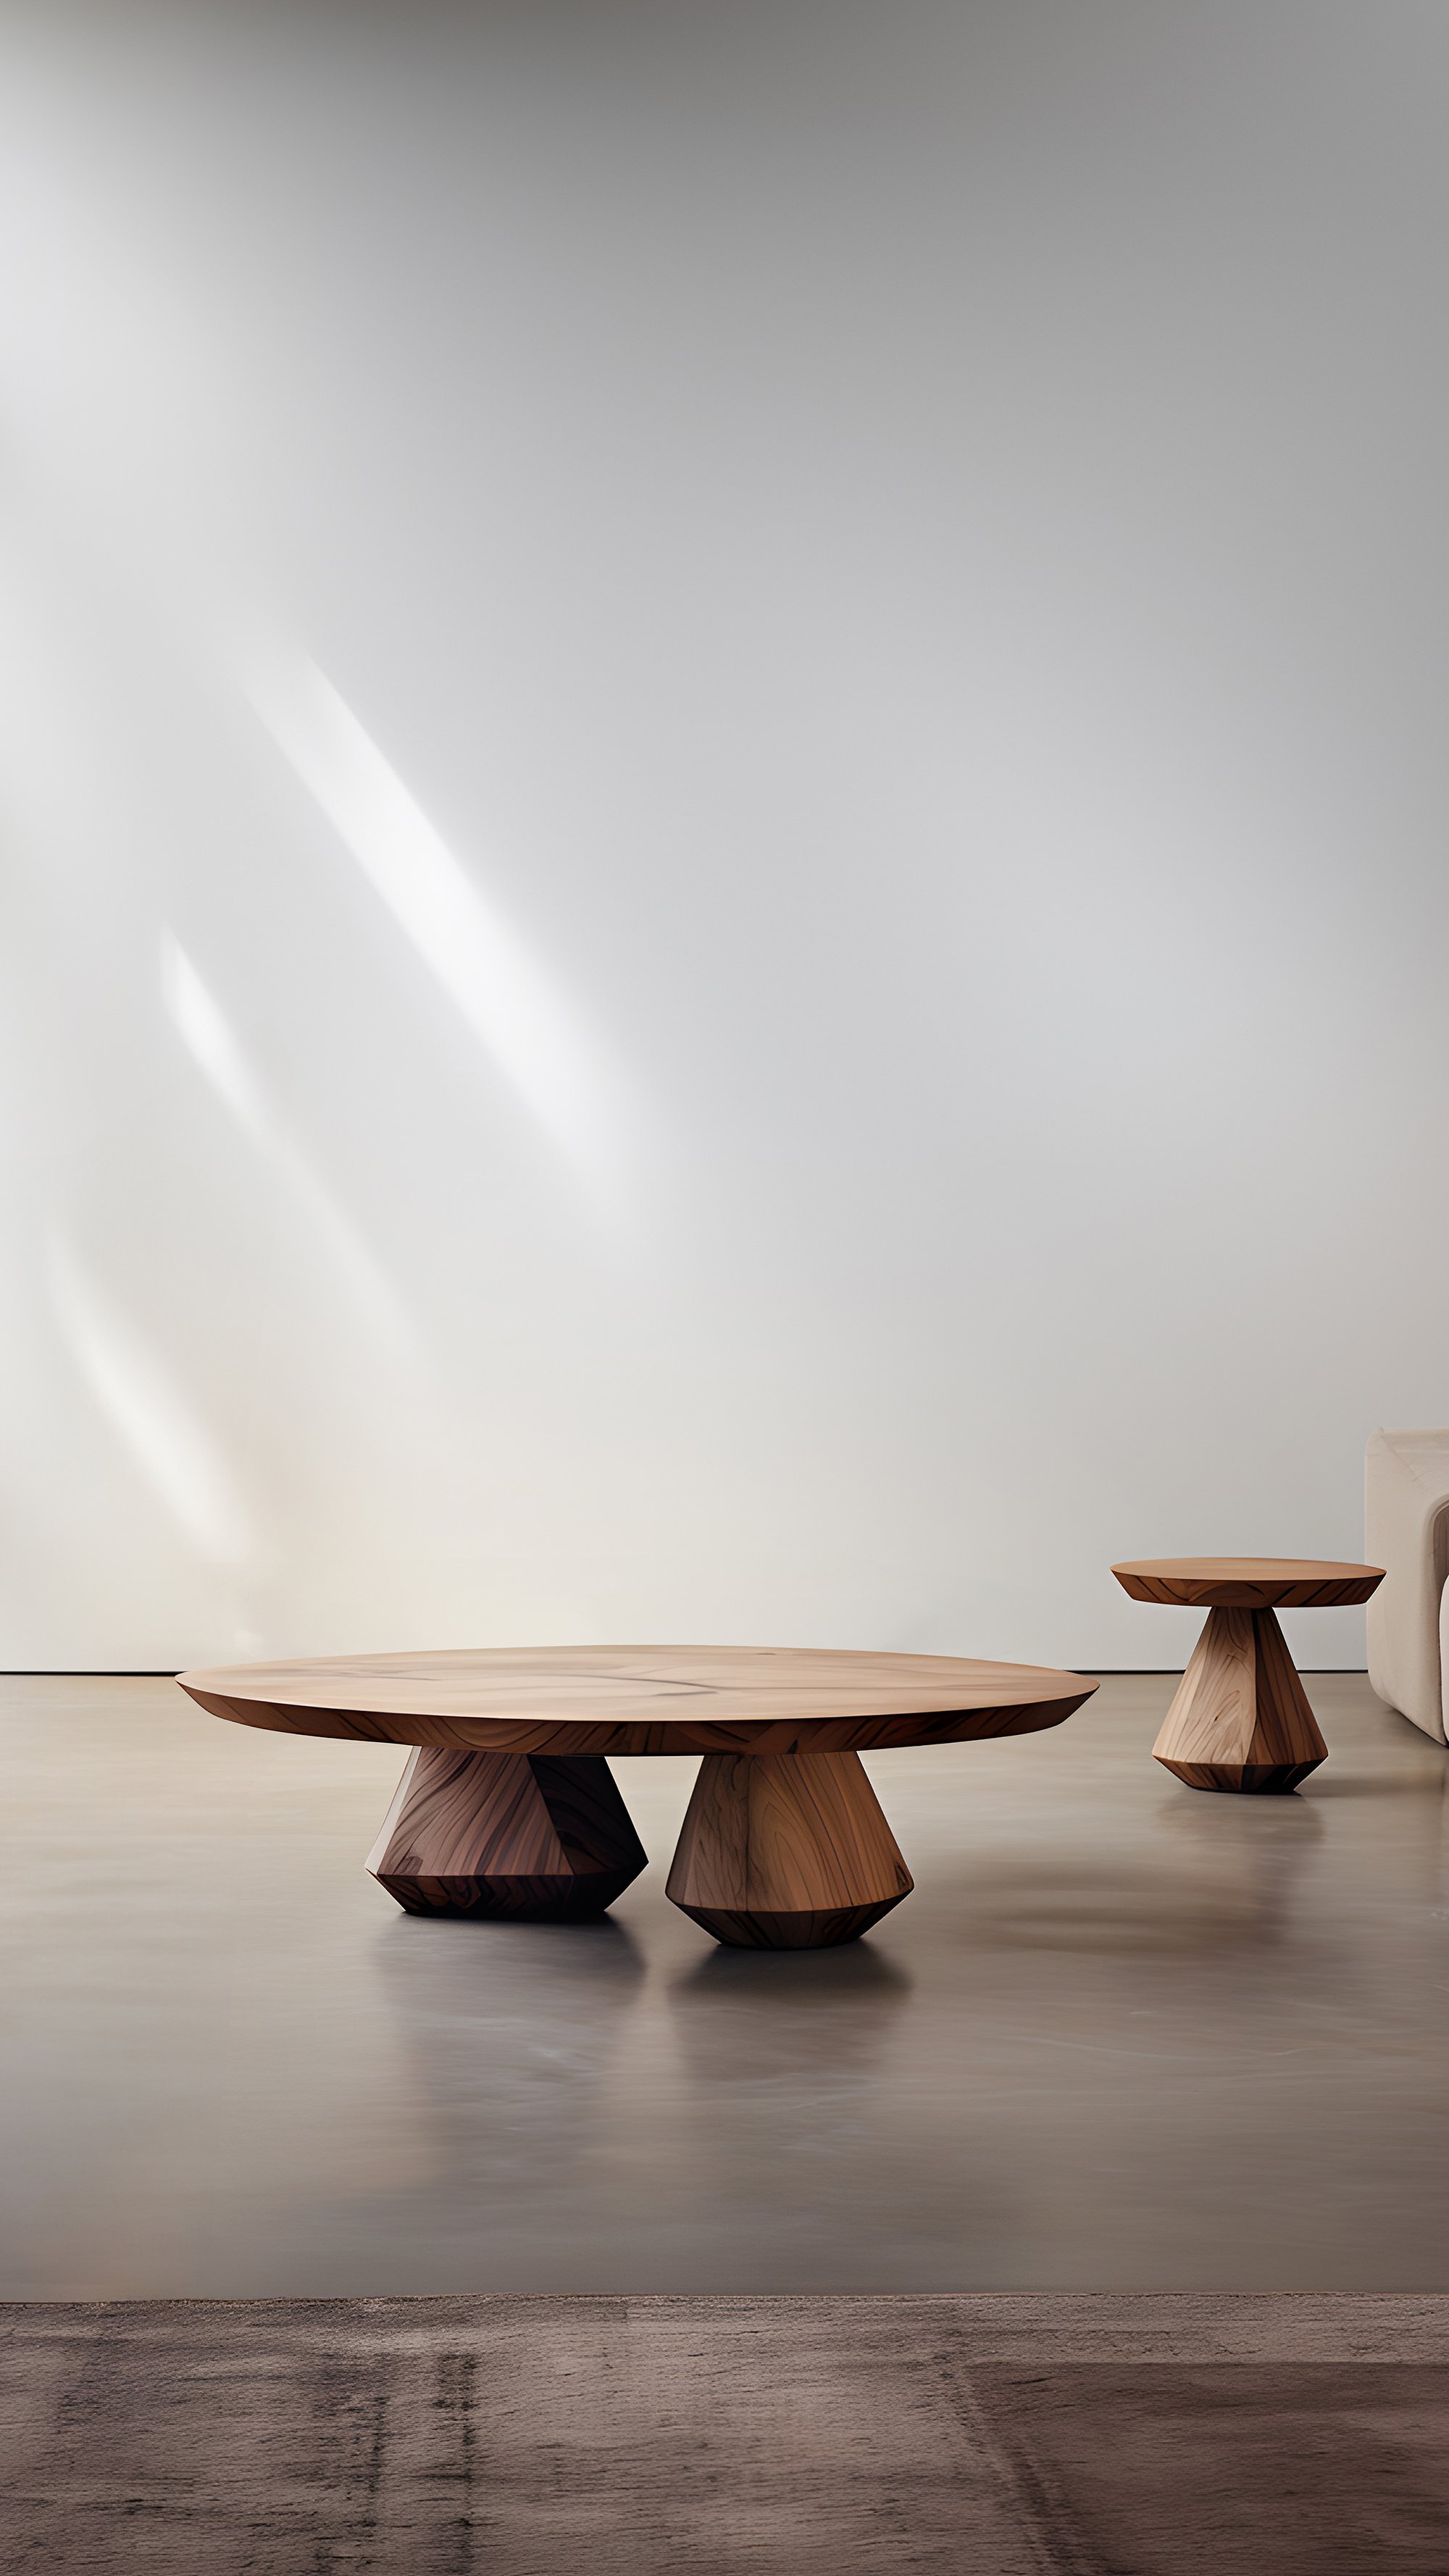 Sculptural Coffee Table Made of Solid Wood, Center Table Solace S45 by Joel Escalona — 7.jpg